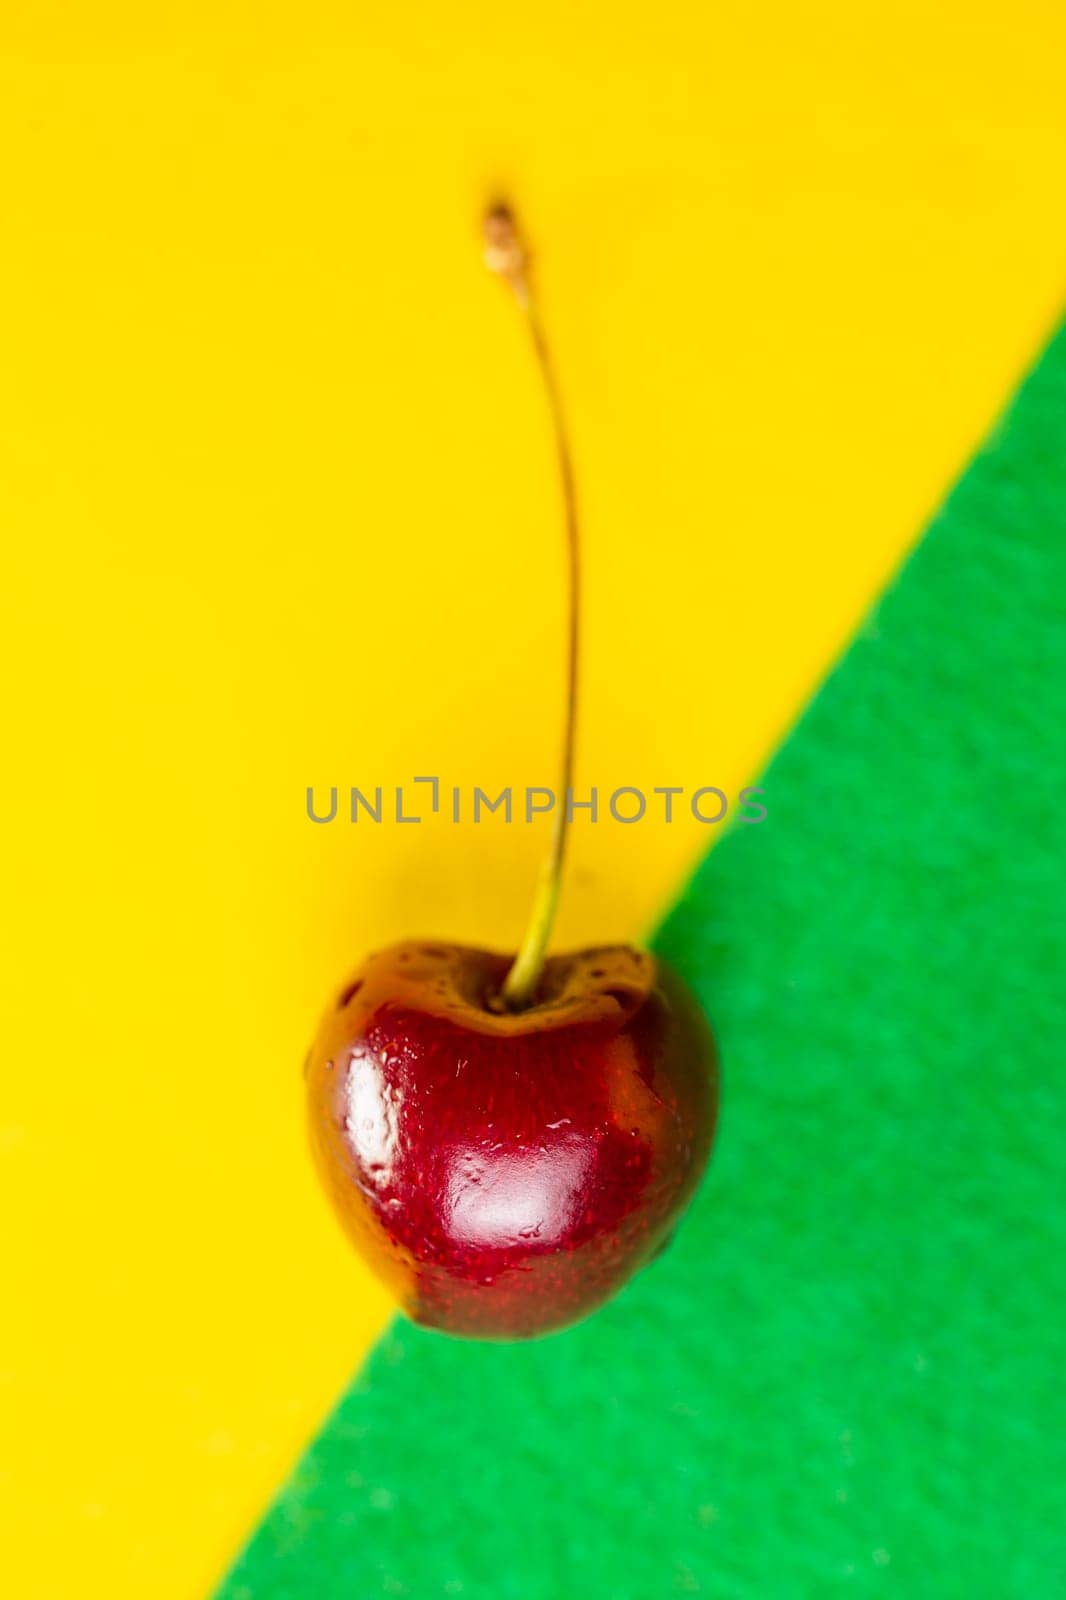 cherry in a close-up section on a yellow background.